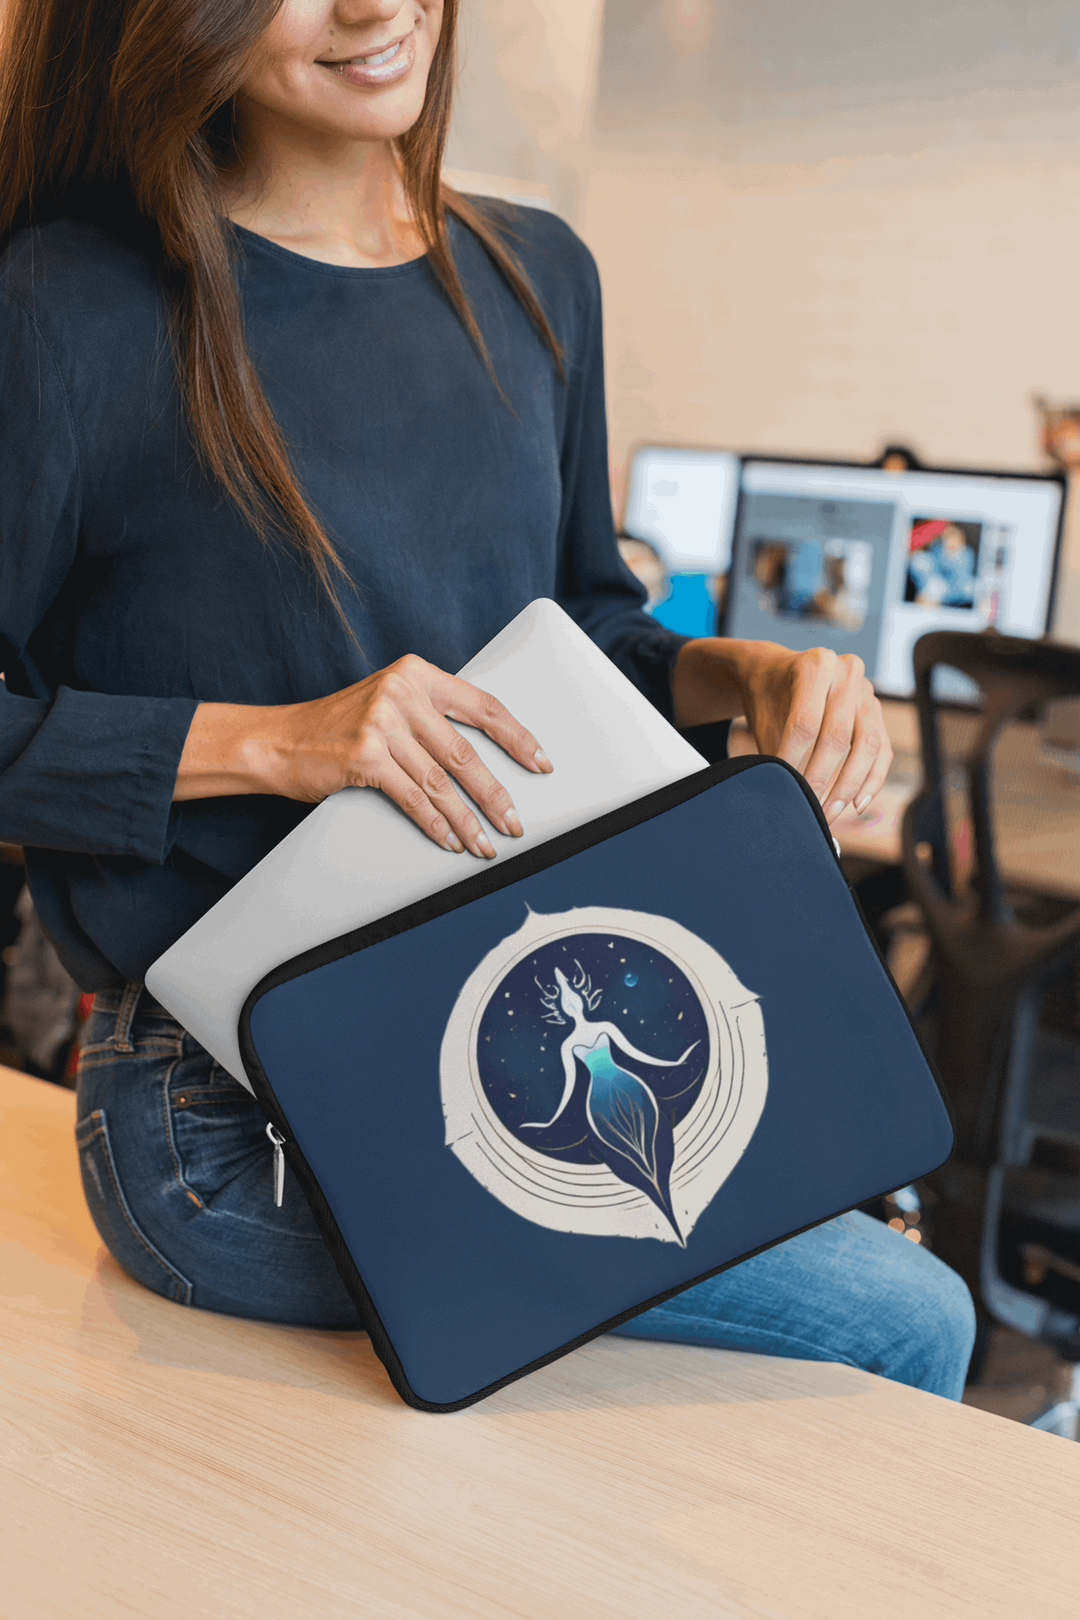 Cosmic Goddess Laptop Sleeve - Protect Your Tech